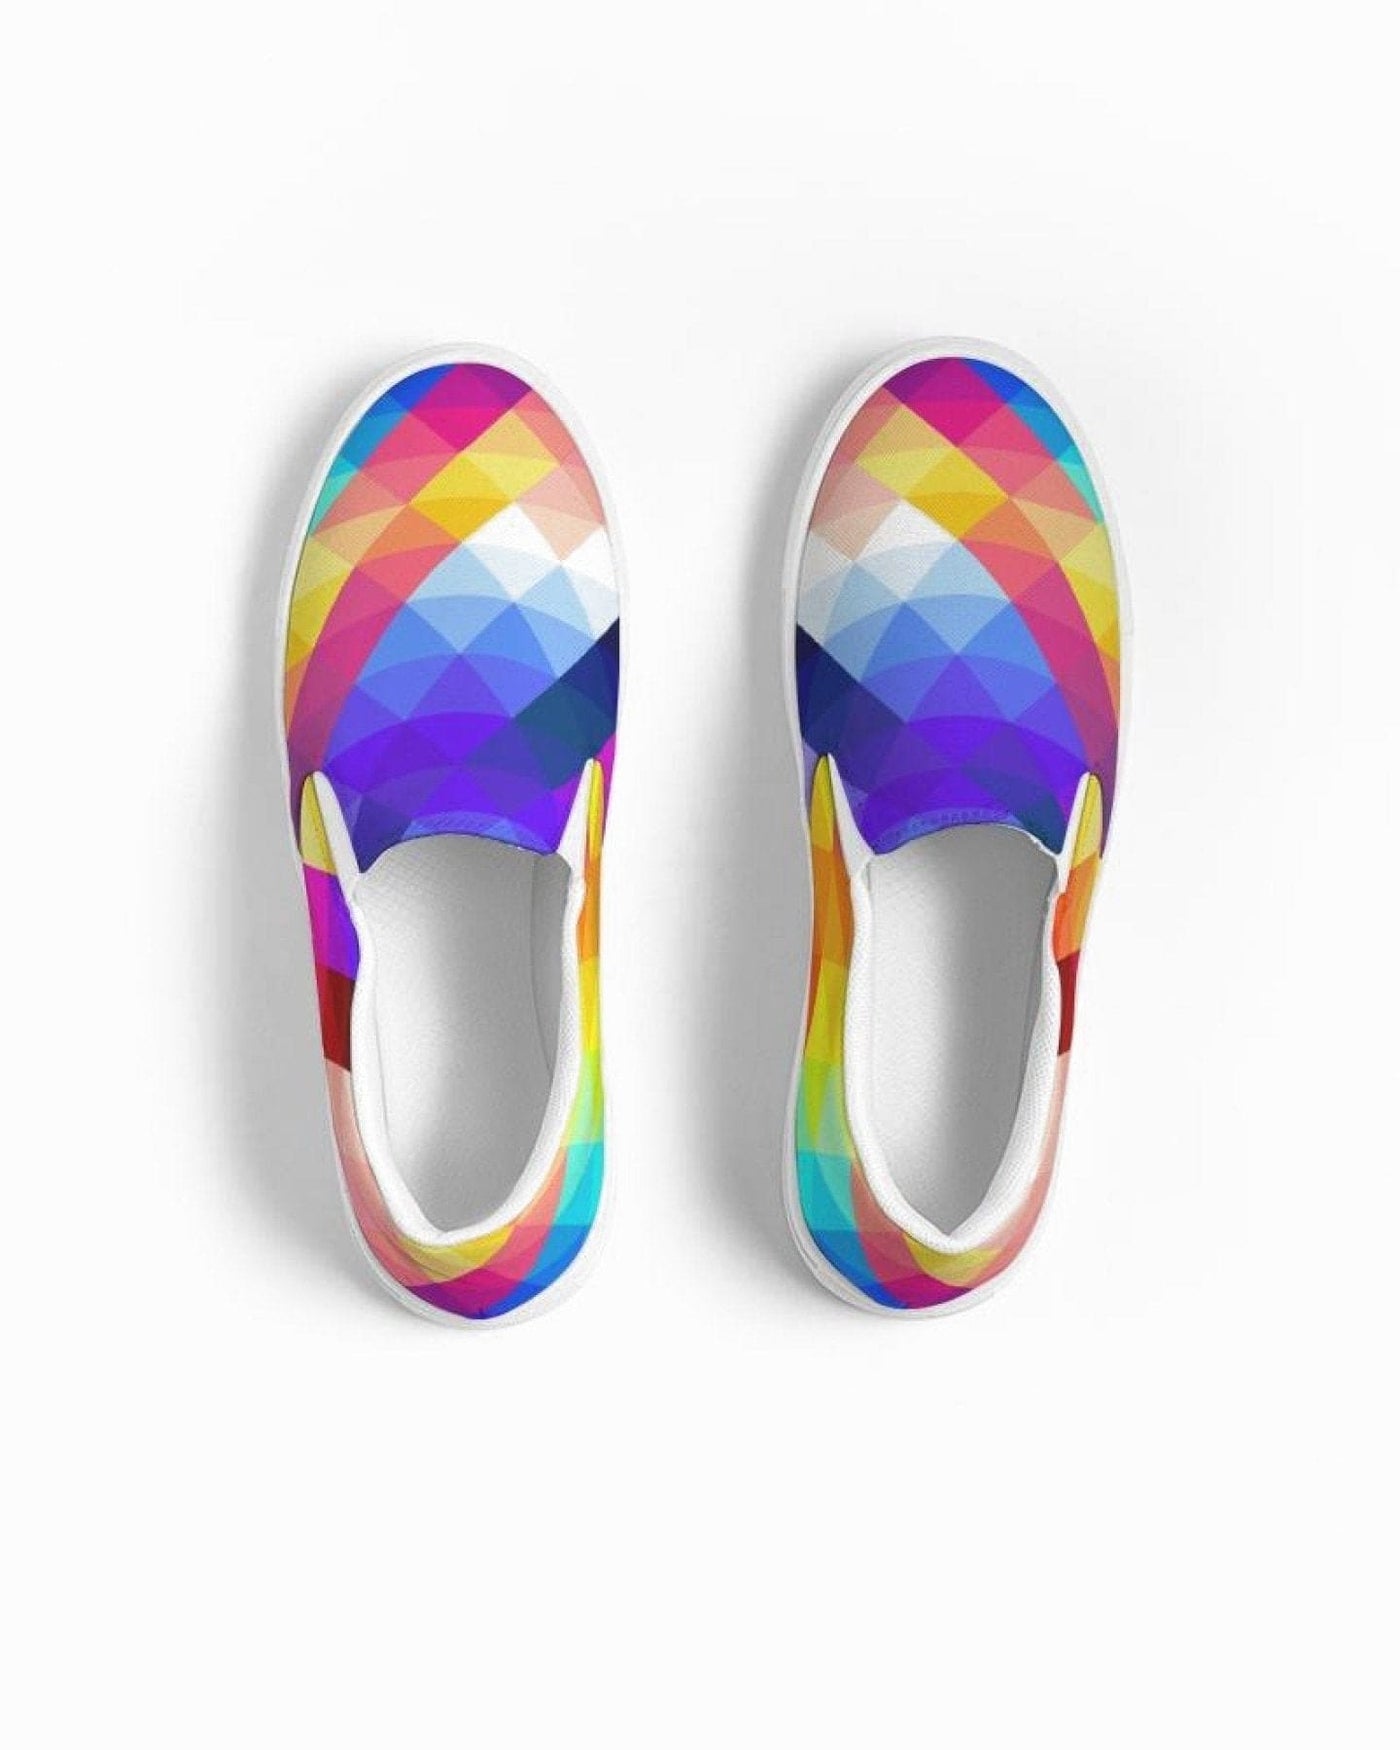 Womens Sneakers - Canvas Slip On Shoes Multicolor Retro Print